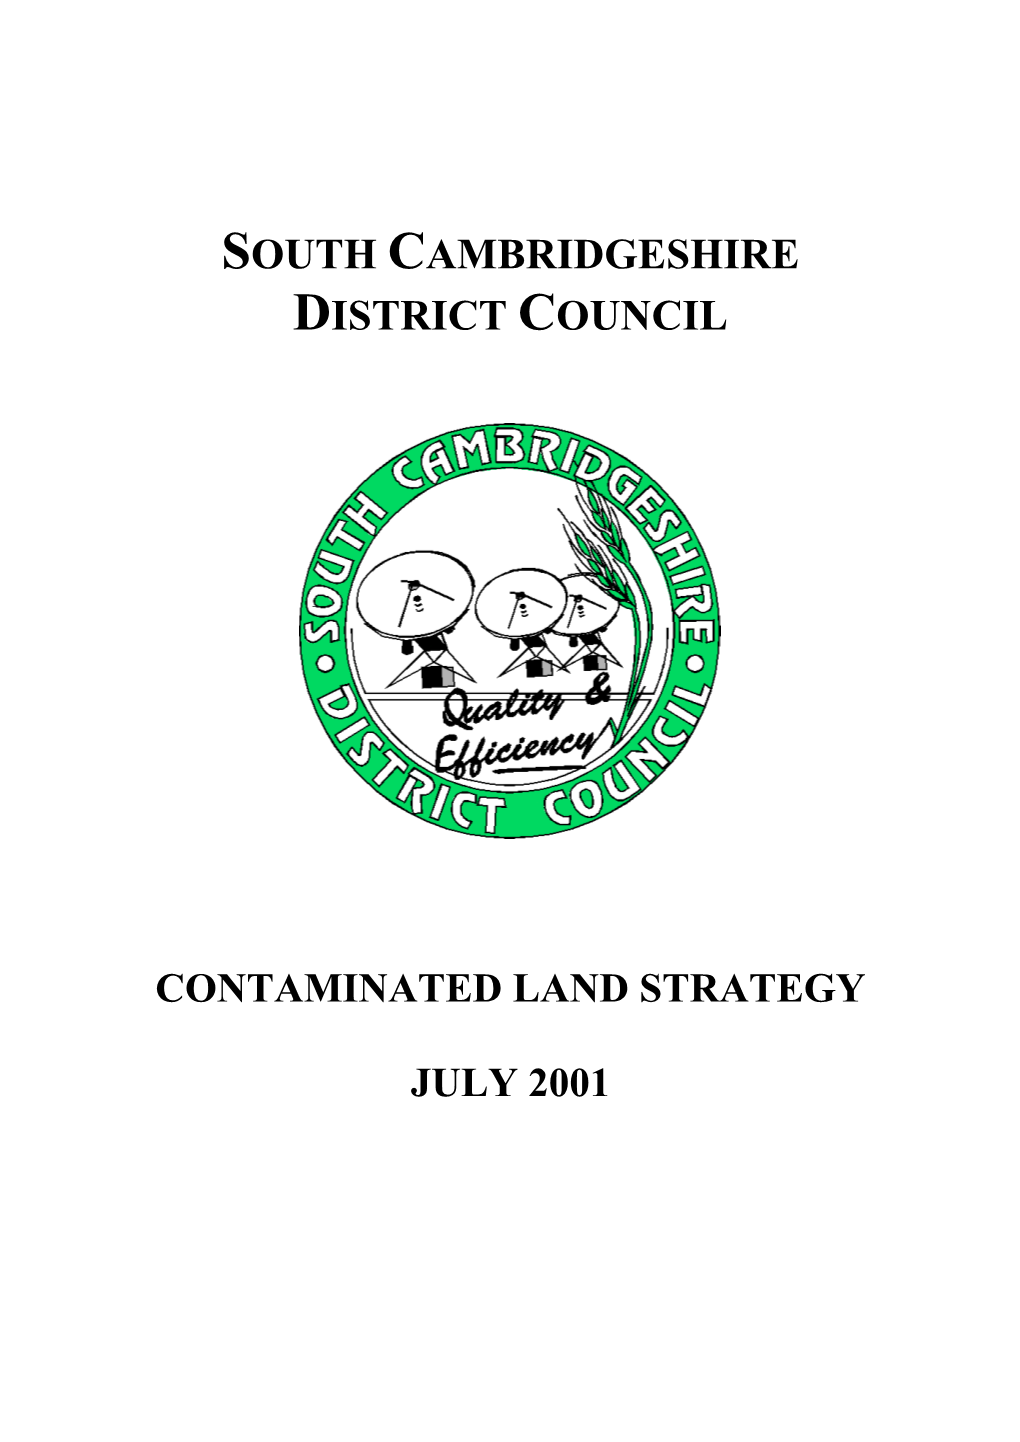 3. Corporate Objectives of South Cambridgeshire District Council